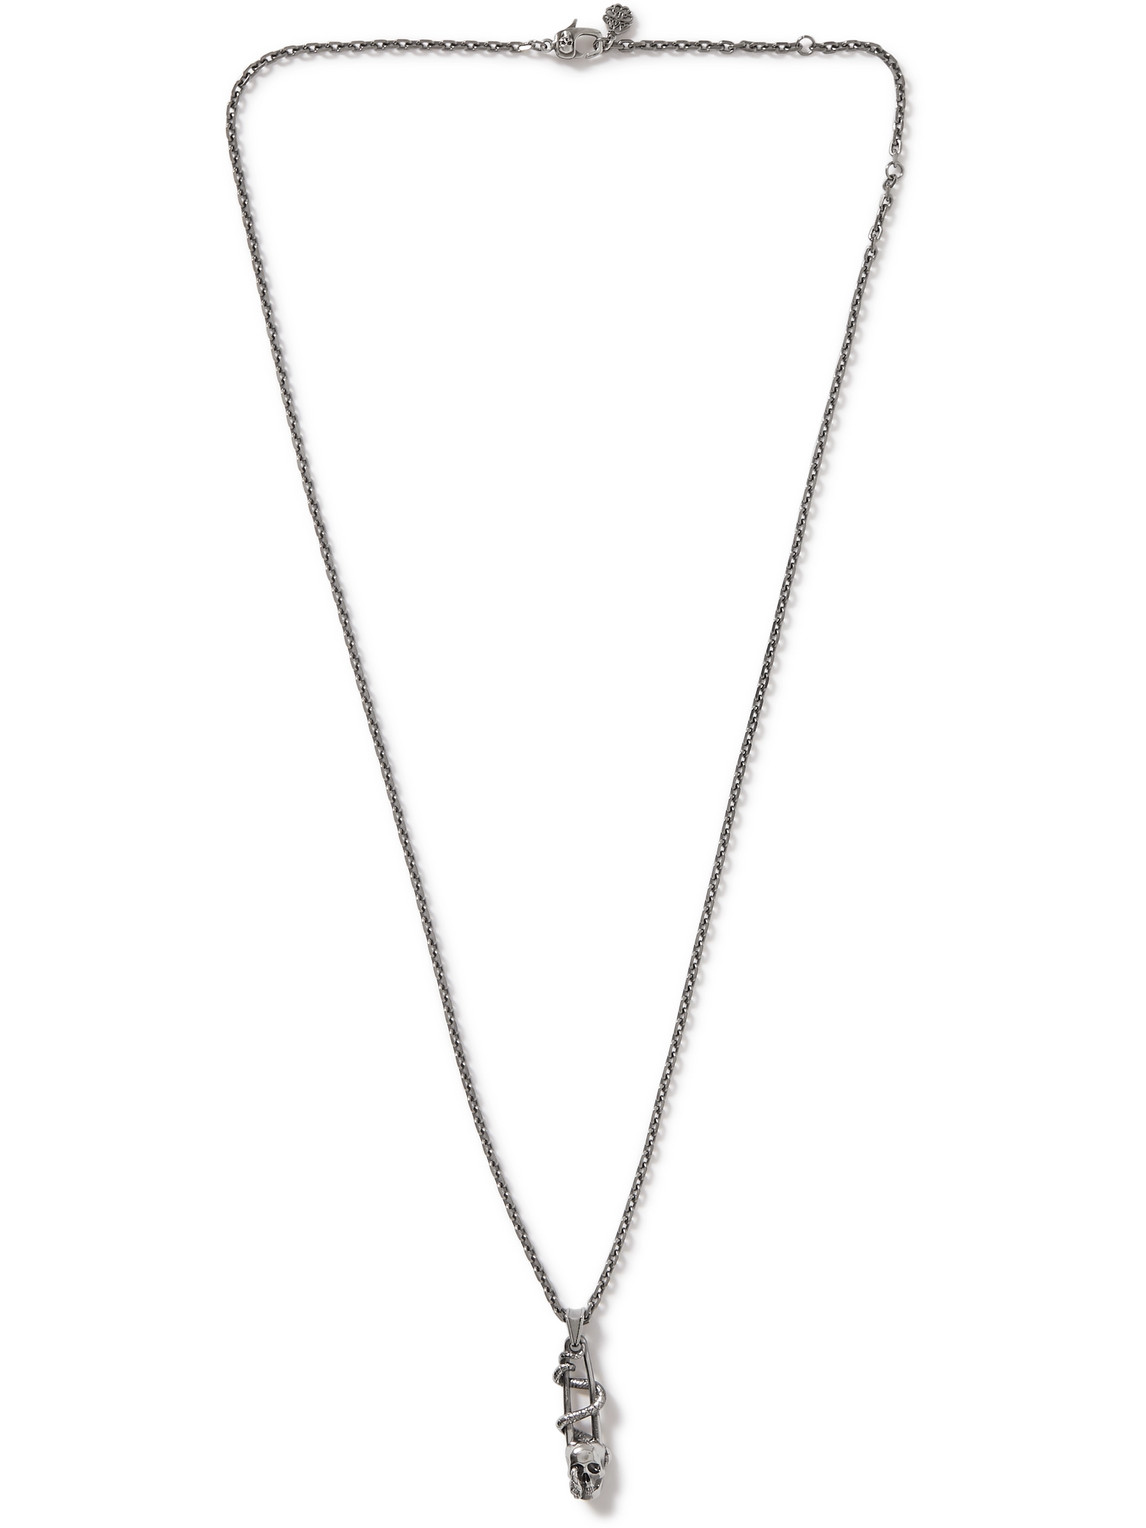 ALEXANDER MCQUEEN BURNISHED SILVER-TONE PENDANT NECKLACE